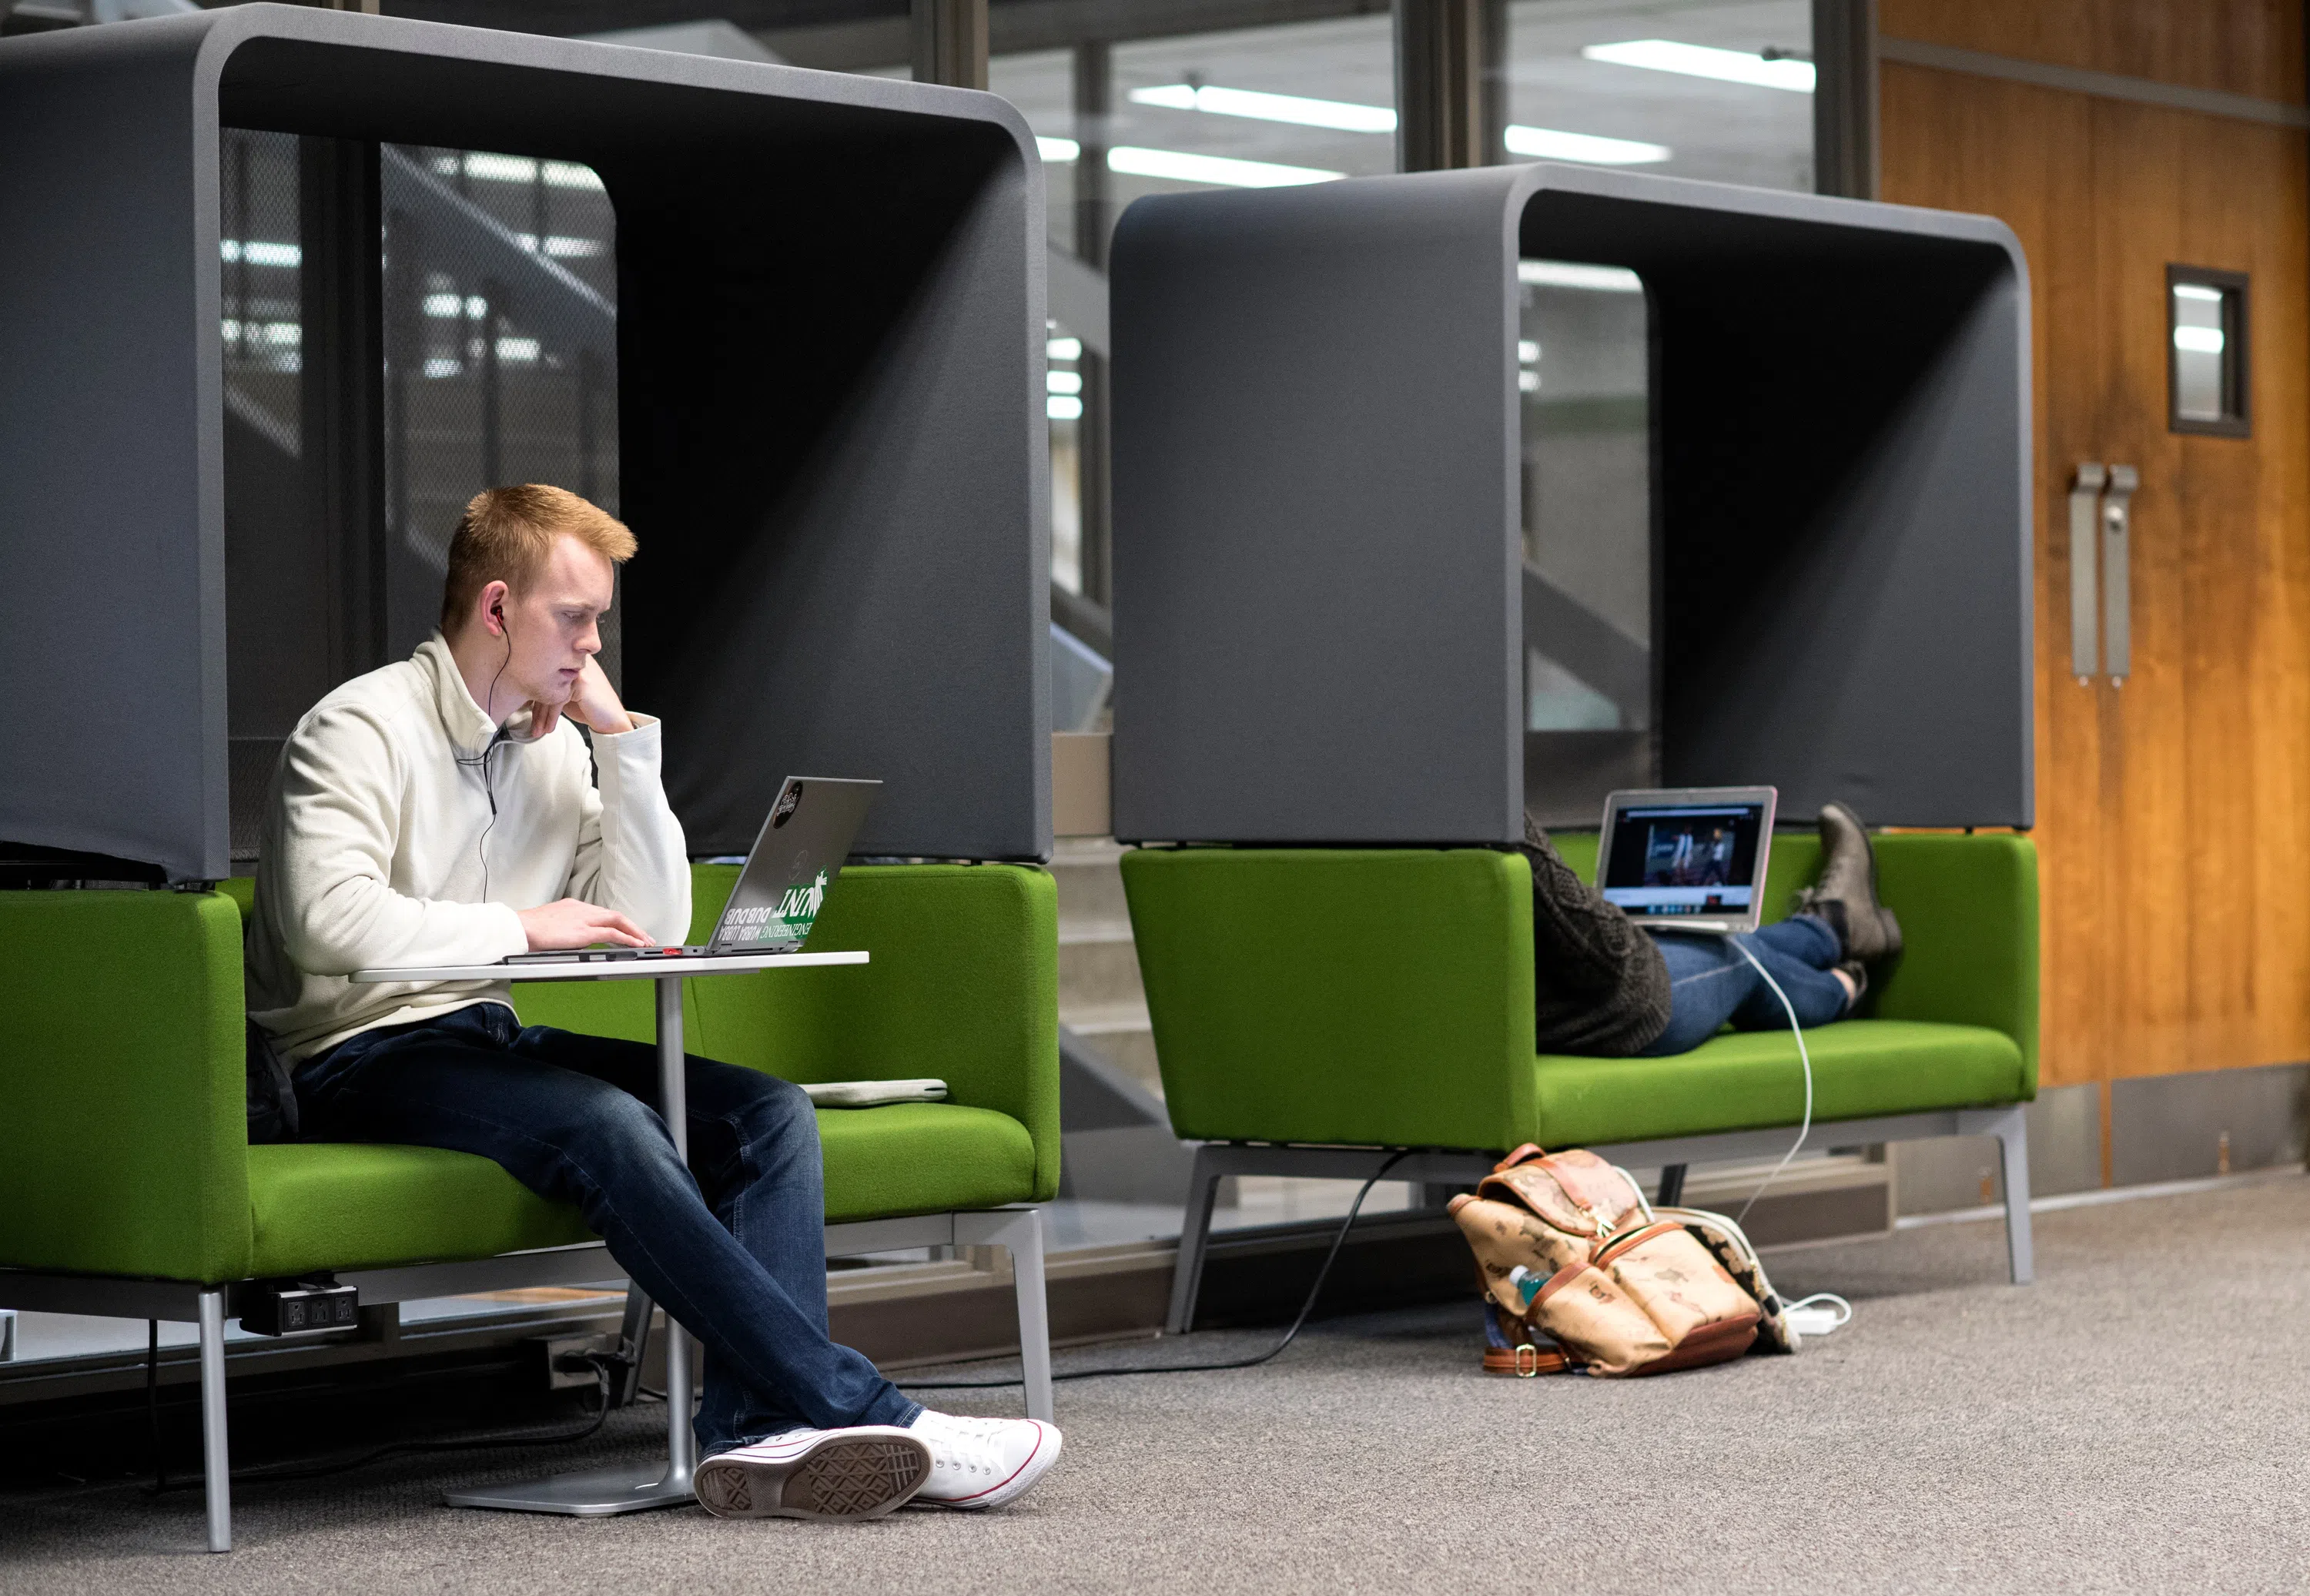 Two students sit in individual study pods with their computers